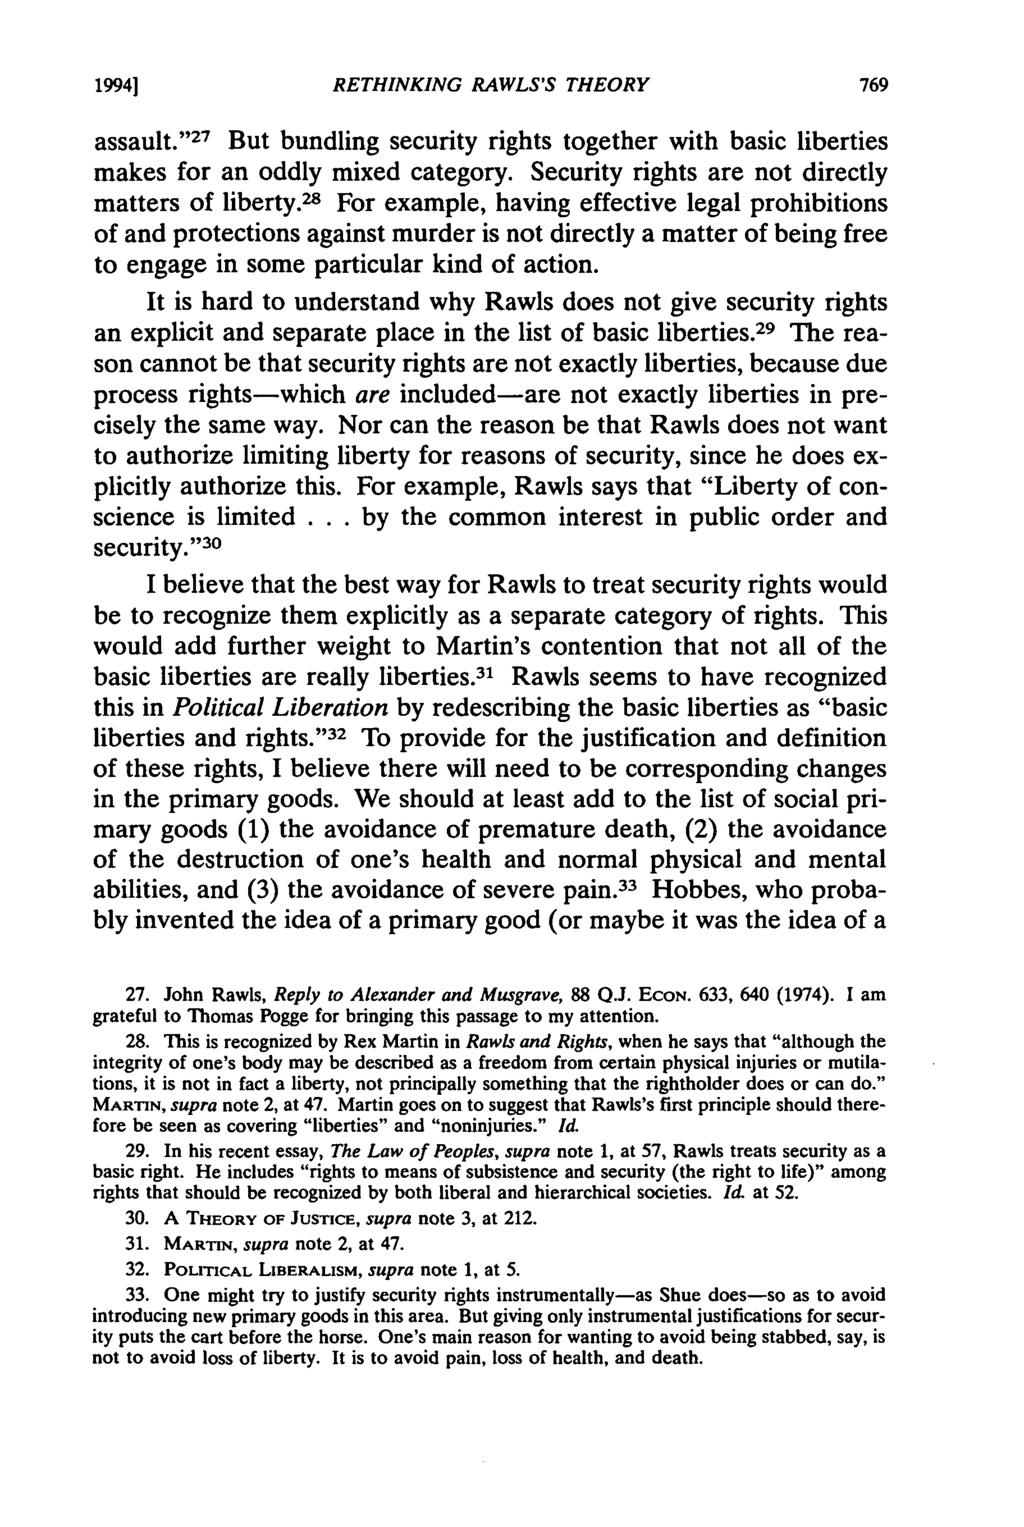 19941 RETHINKING RAWLS'S THEORY assault. ' 27 But bundling security rights together with basic liberties makes for an oddly mixed category. Security rights are not directly matters of liberty.